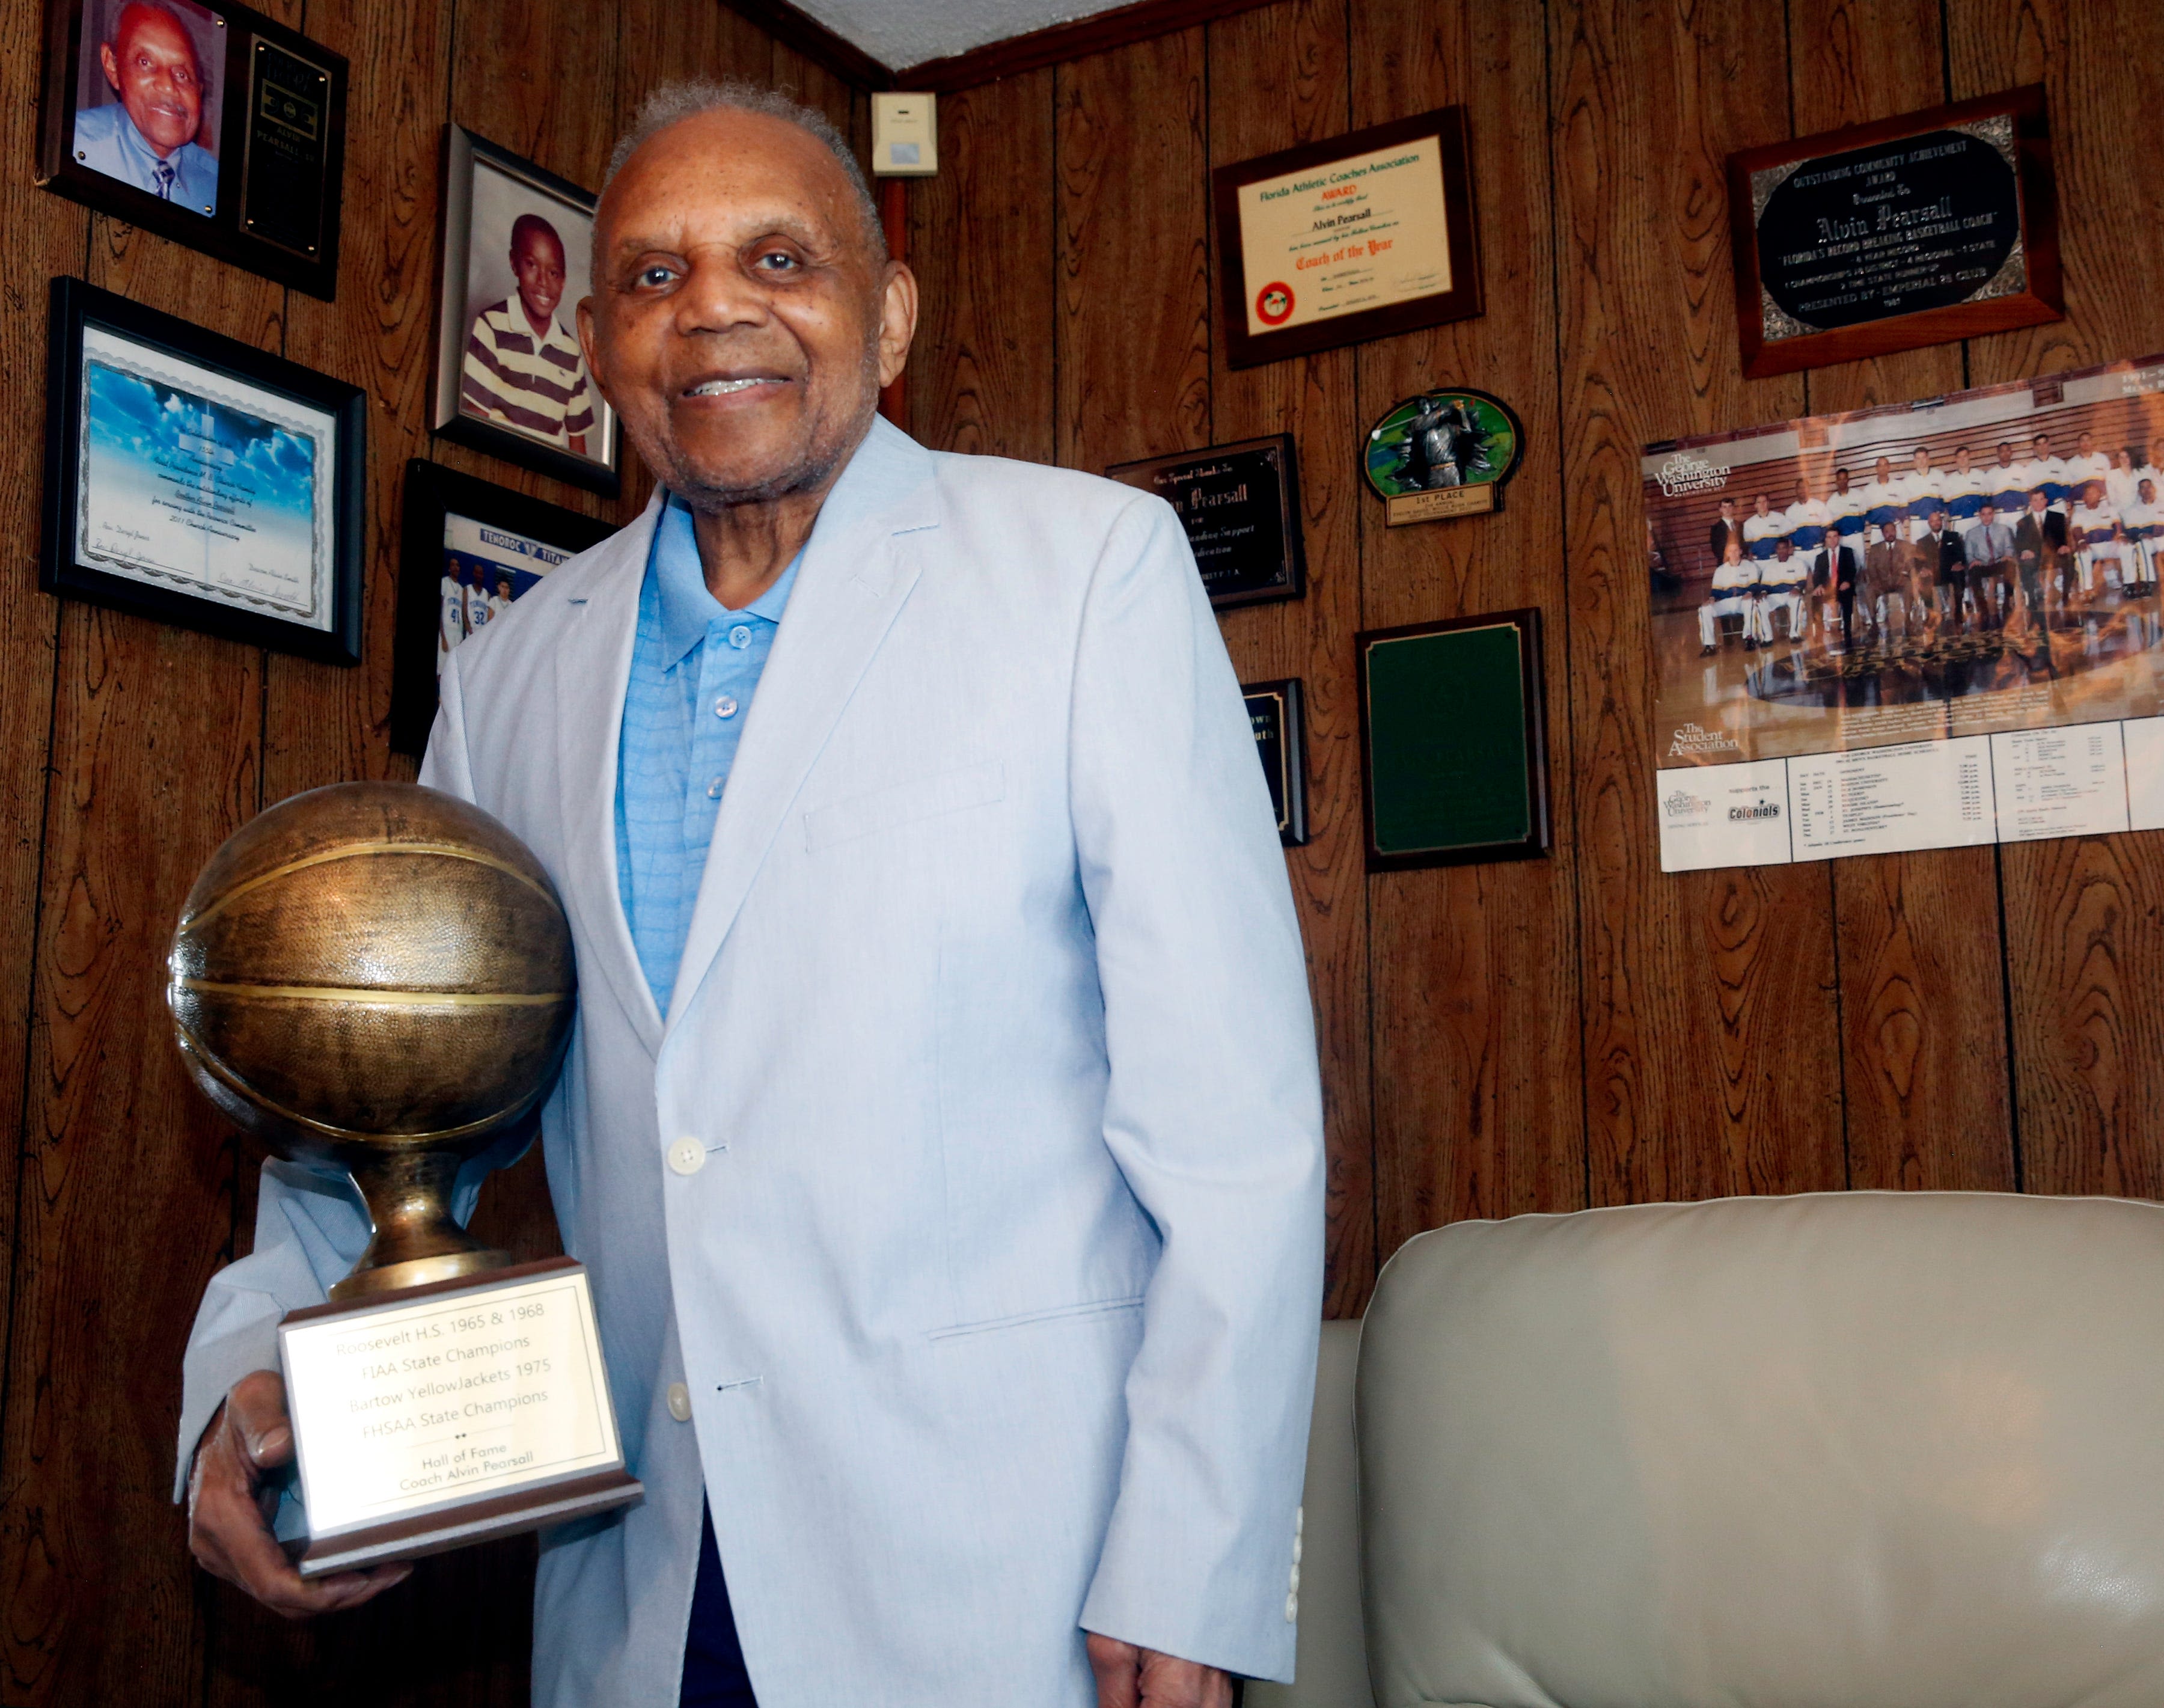 Alvin Pearsall played major role in Polk County high school basketball after integration